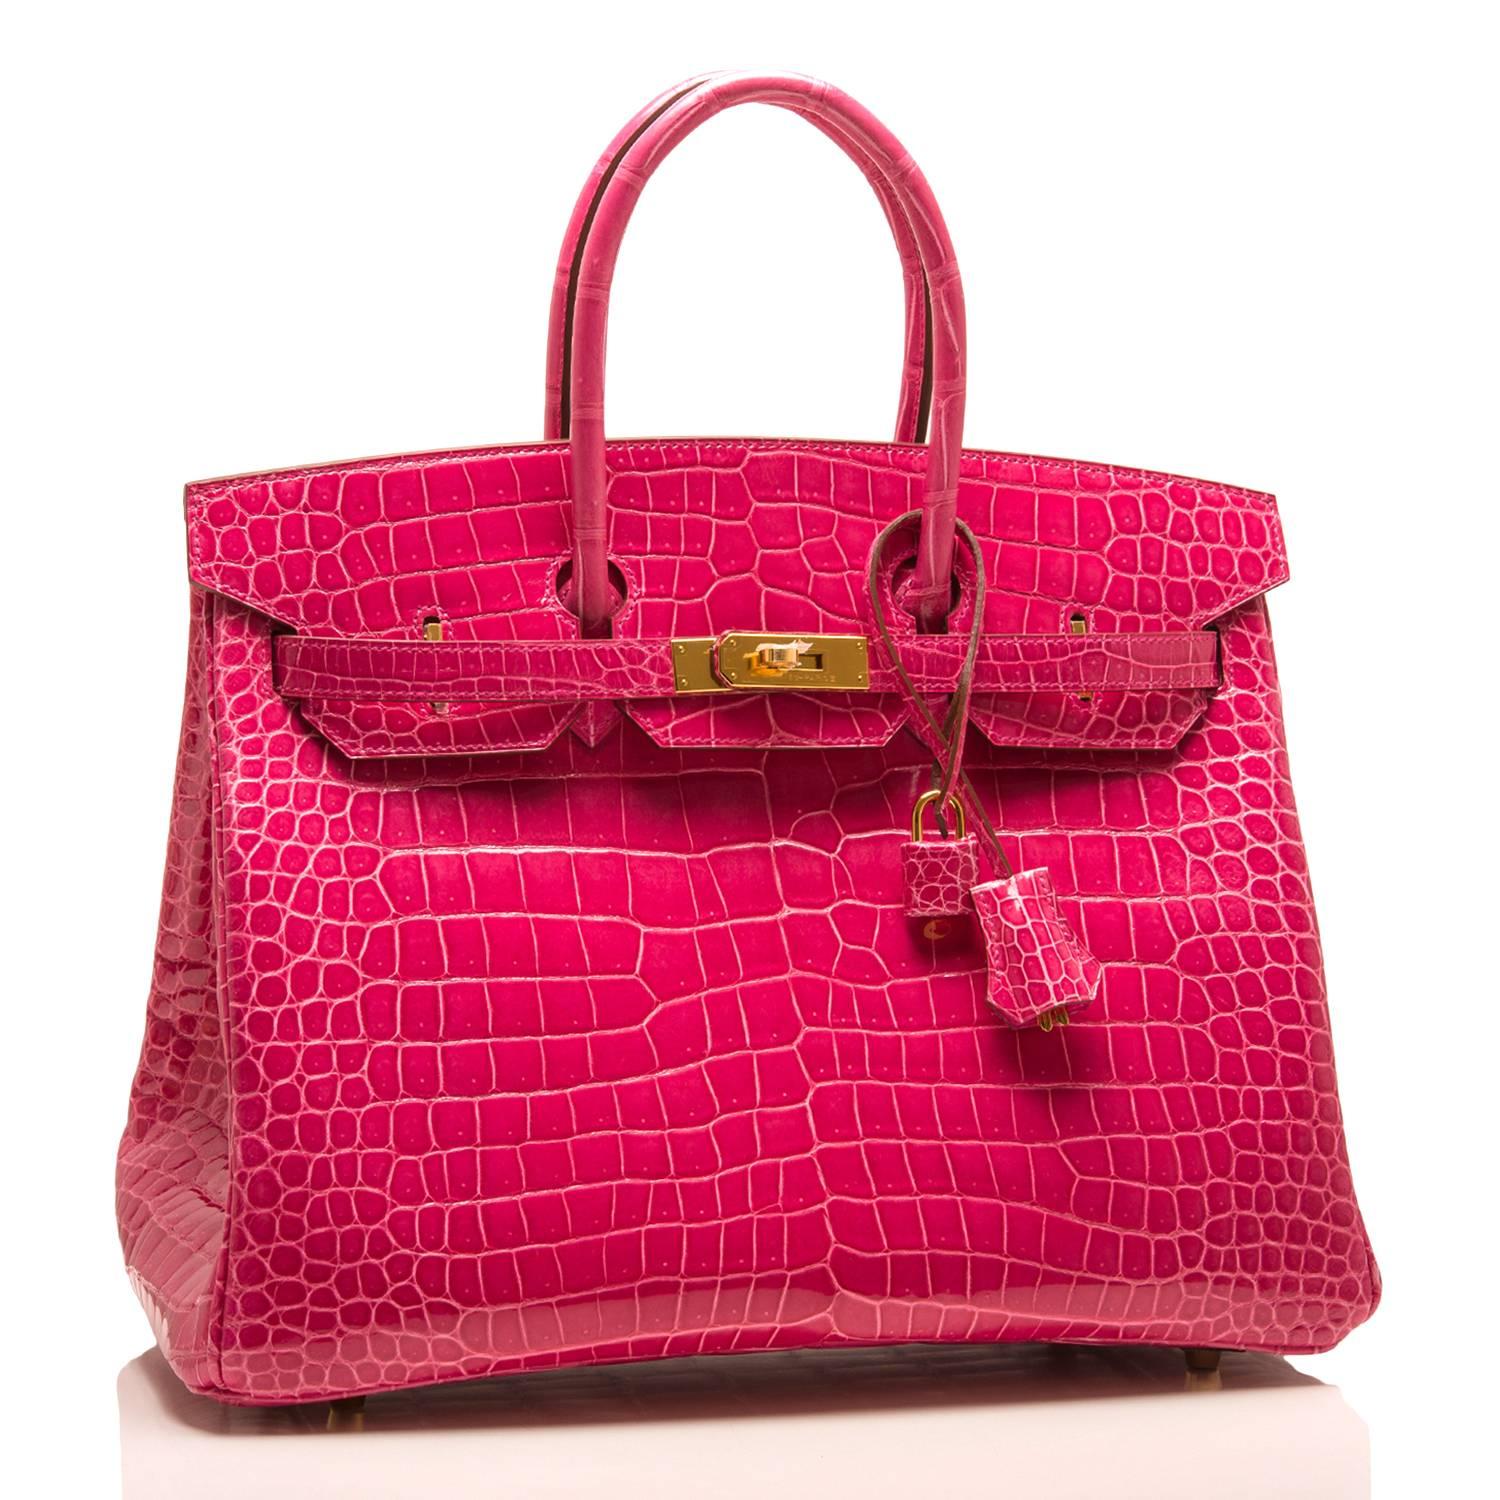 Hermes Rose Tyrien Birkin 35cm of shiny porosus crocodile leather with gold hardware.

This Birkin features tonal stitching, a front toggle closure, a clochette with lock and two keys, and double rolled handles.

The interior is lined with Rose